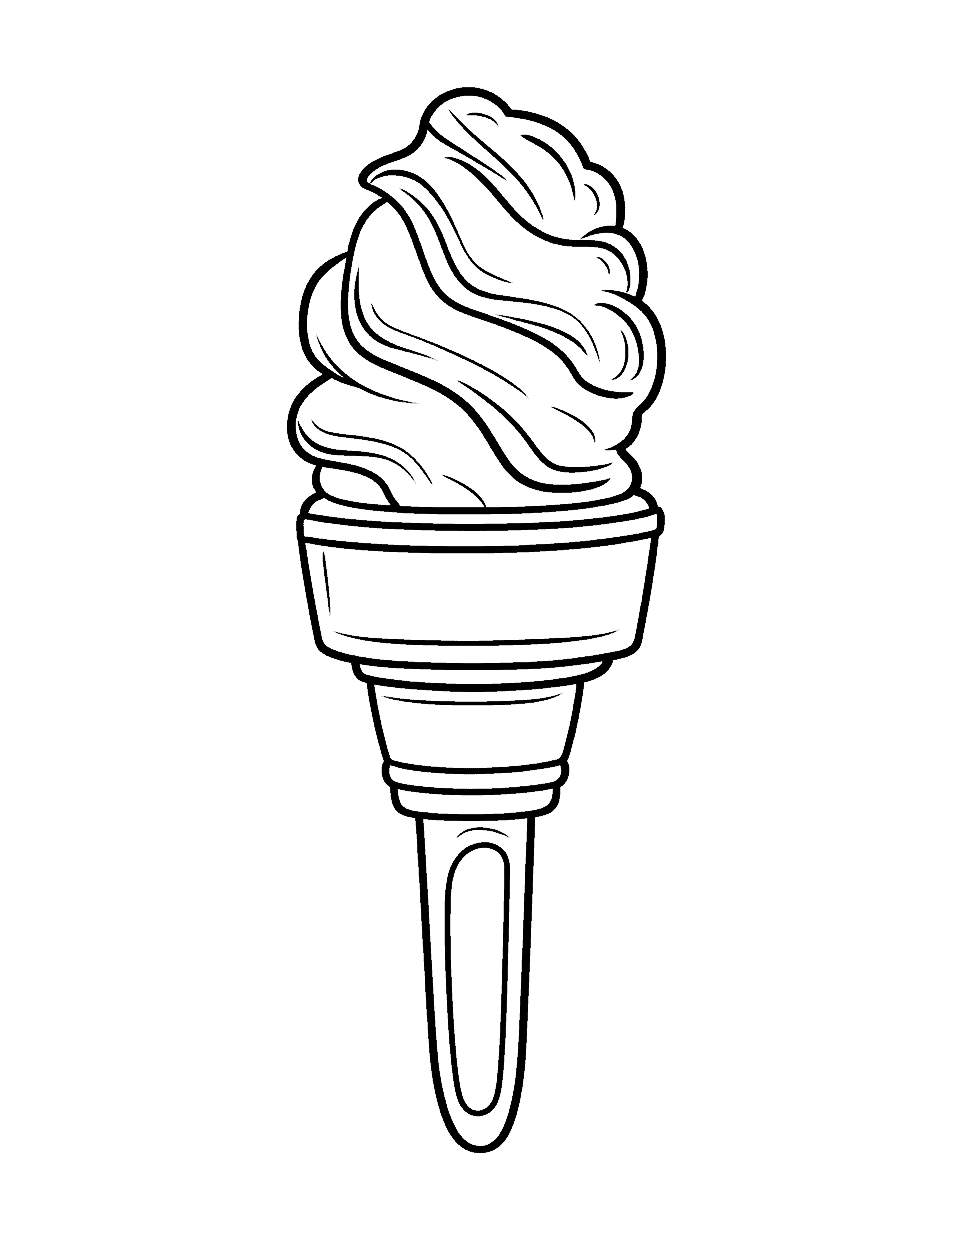 Realistic Ice Cream Scoop Coloring Page - A lifelike image of an ice cream scoop in a cone.